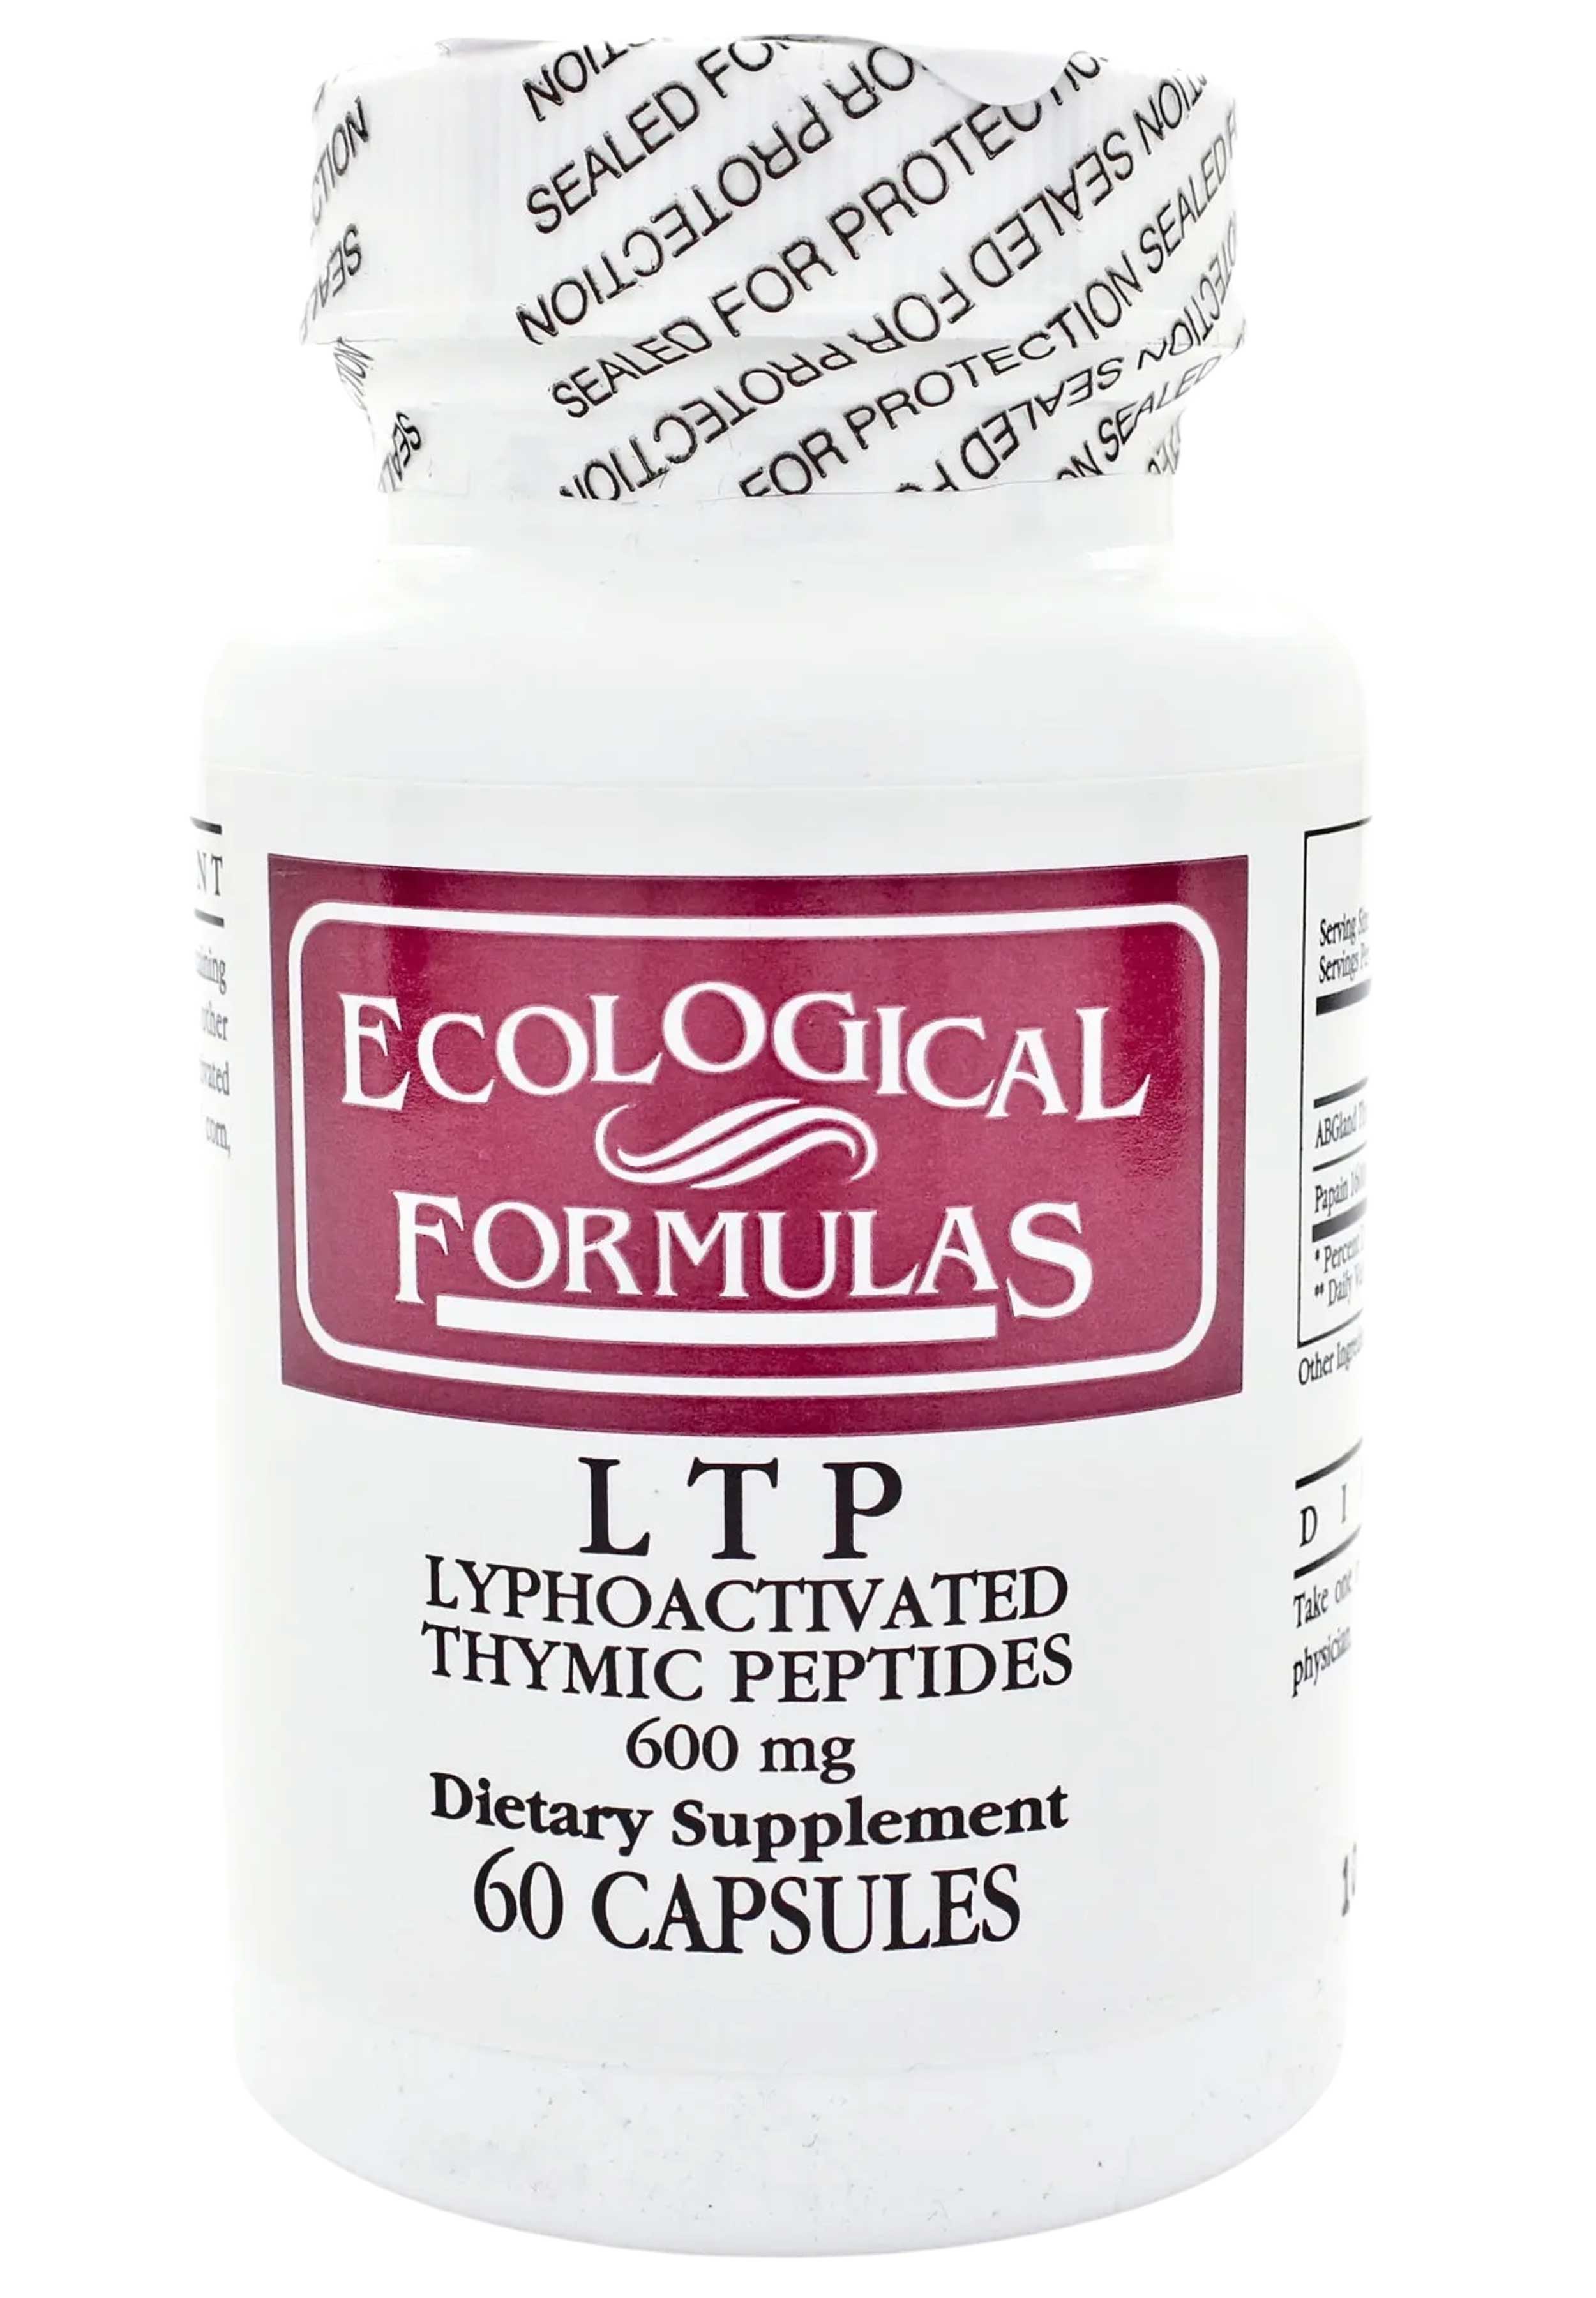 Ecological Formulas/Cardiovascular Research LTP Lyphoactivated Thymic Peptides